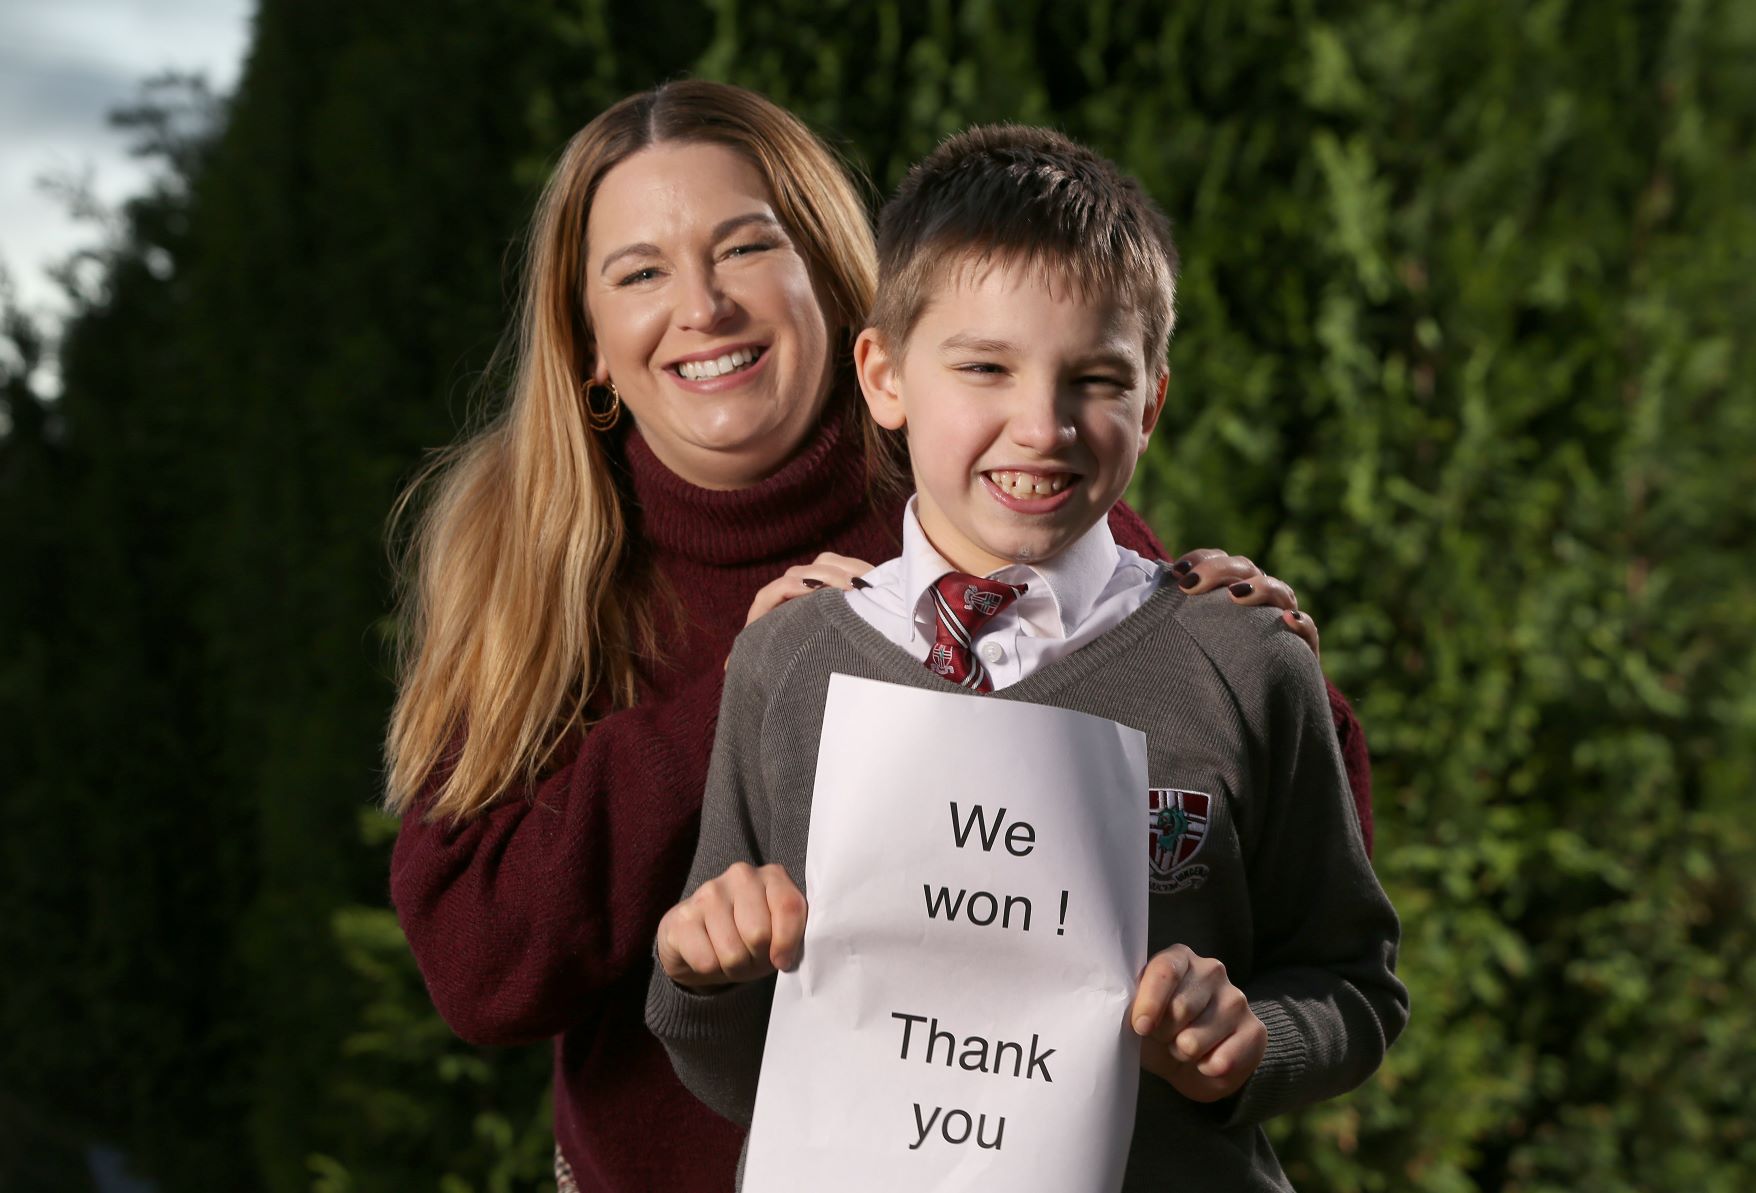 Zach, aged 11, is in grey school uniform and is holding an A4 sheet saying 'We won - thank you'. His mum, claire, with long blonde hair is standing behind him with her hands on his shoulders